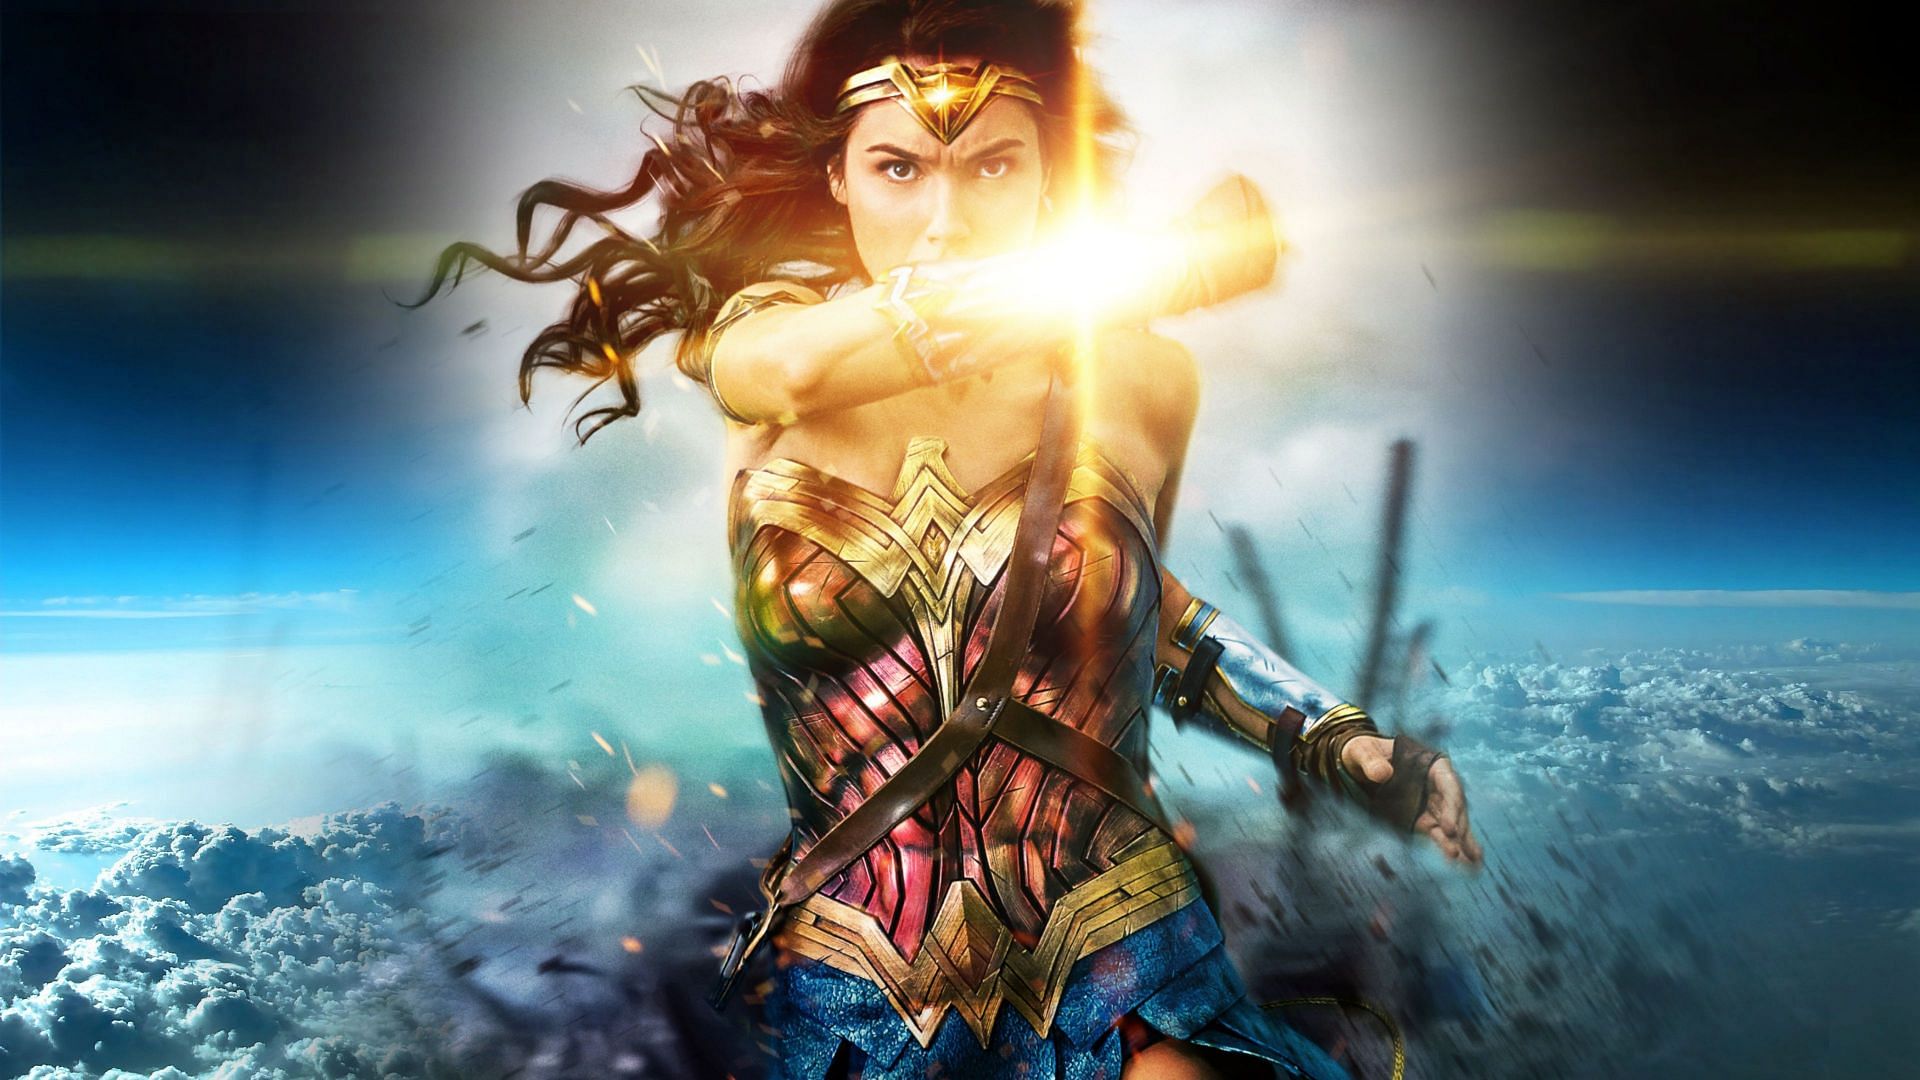 Wonder Woman is one of the most powerful and influential superheroes of all time. (Image Via Sportskeeda)